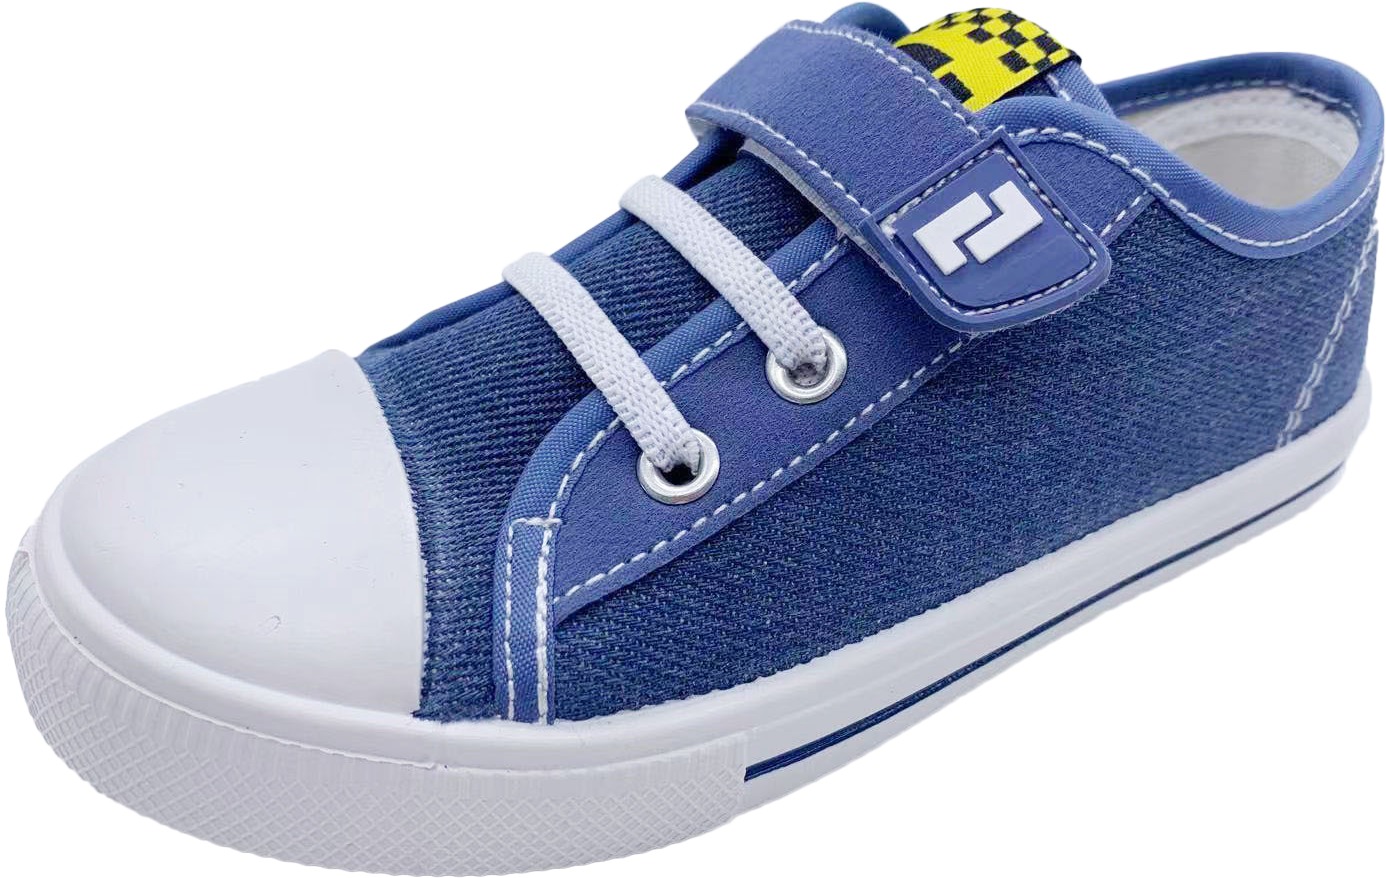 6 To 7 Years Boy Shoe Size